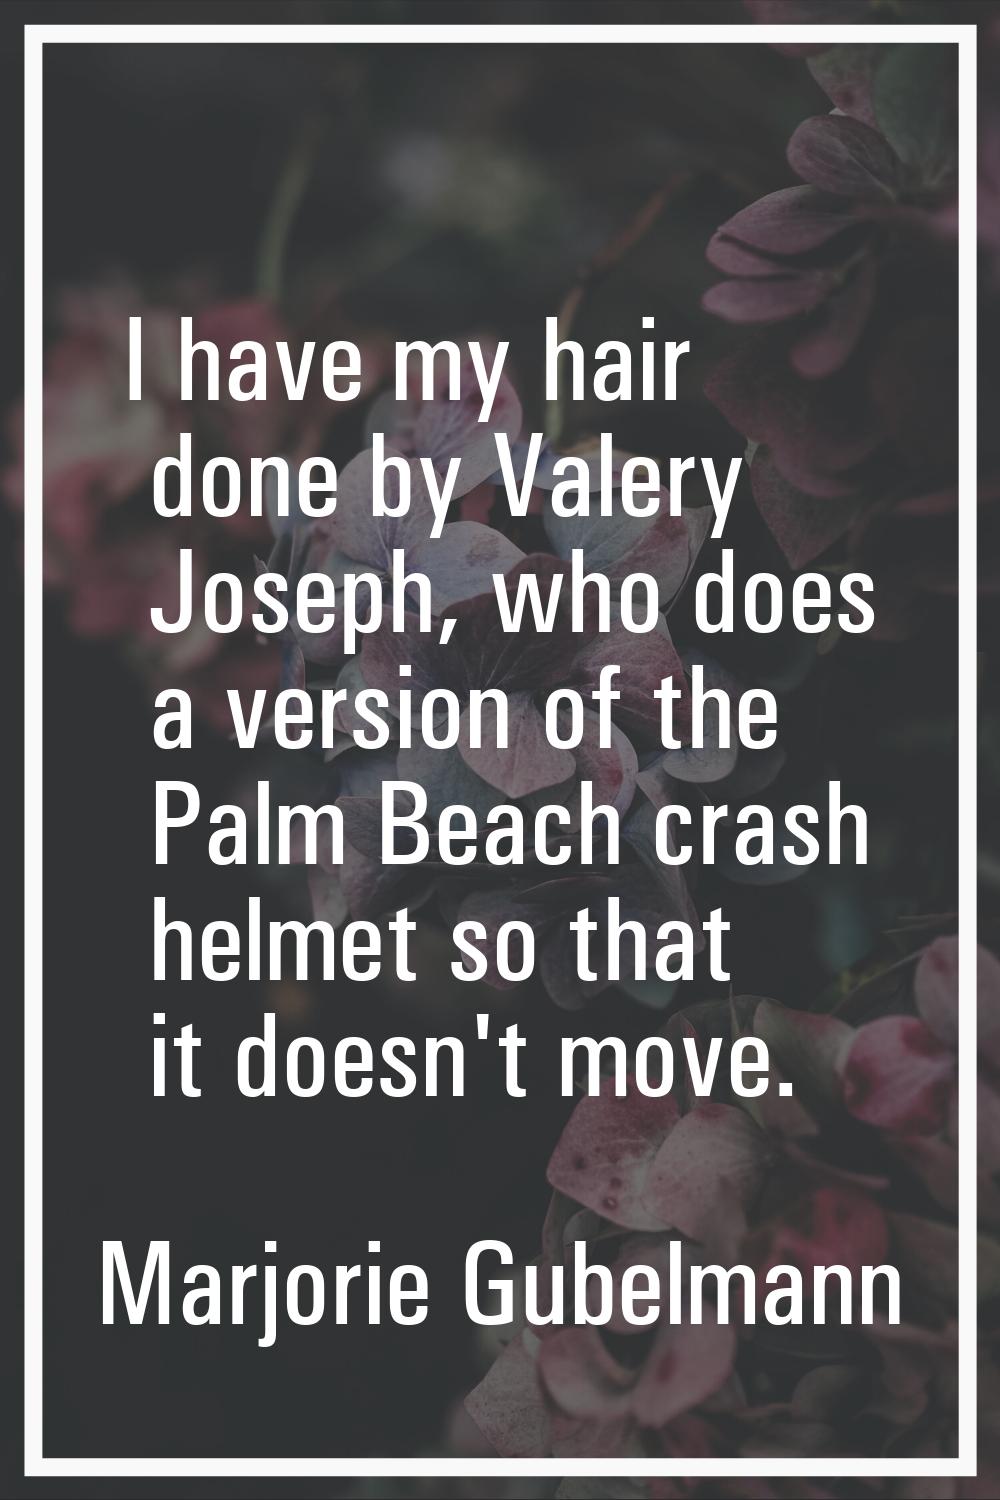 I have my hair done by Valery Joseph, who does a version of the Palm Beach crash helmet so that it 